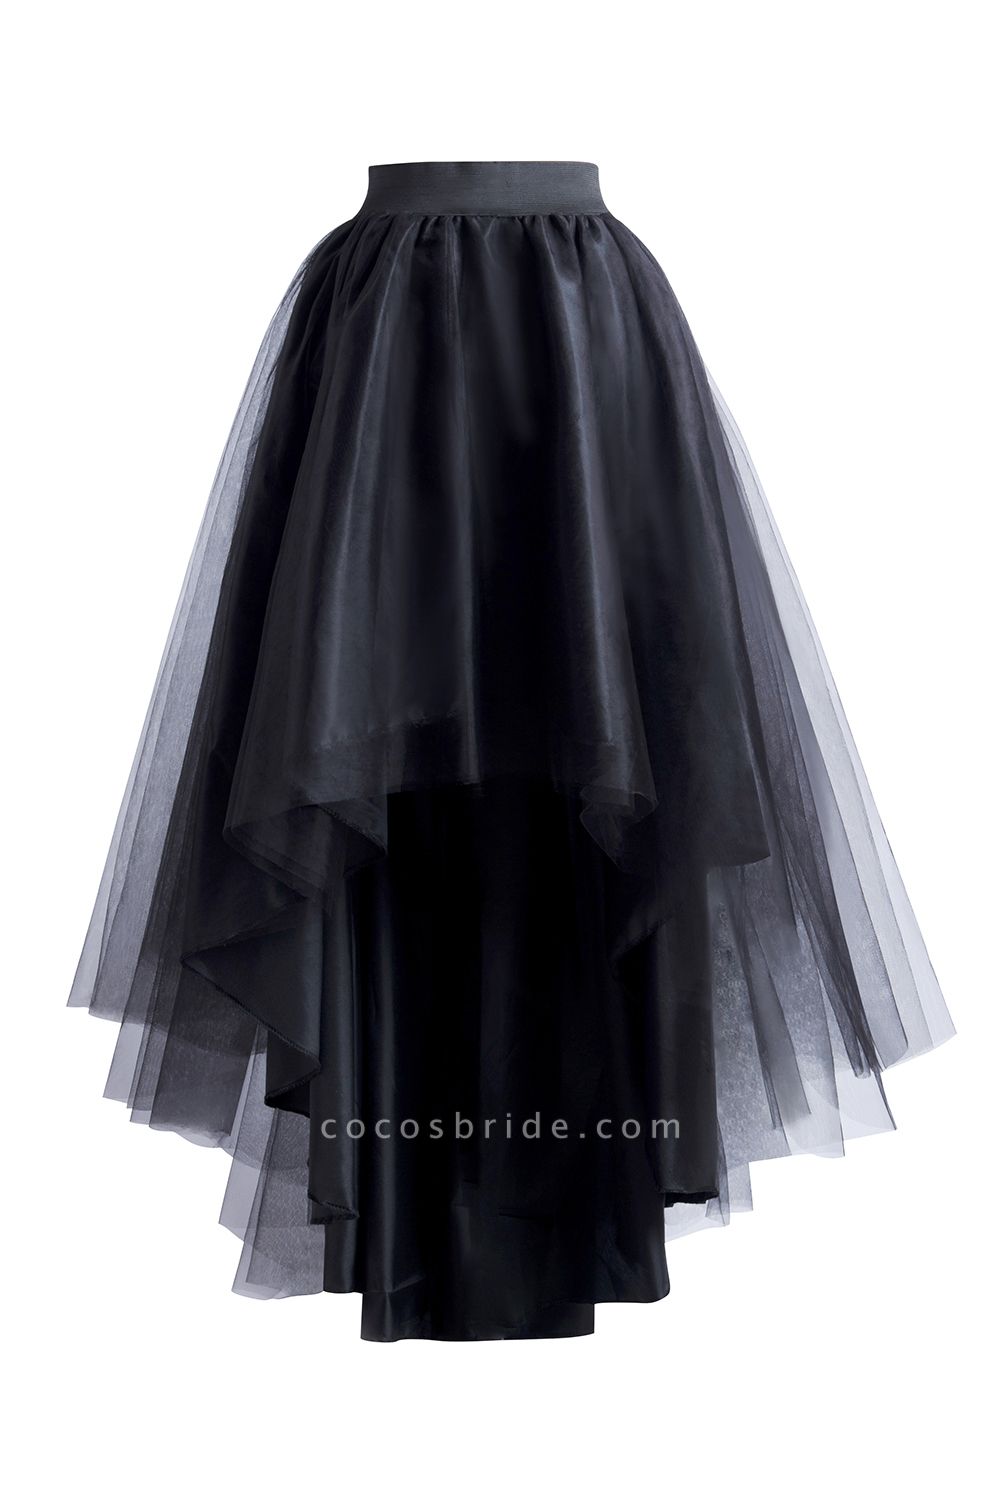 Casual High Low Tiered Tulle Satin Skirt Girl Gown Tutu Skirt Women